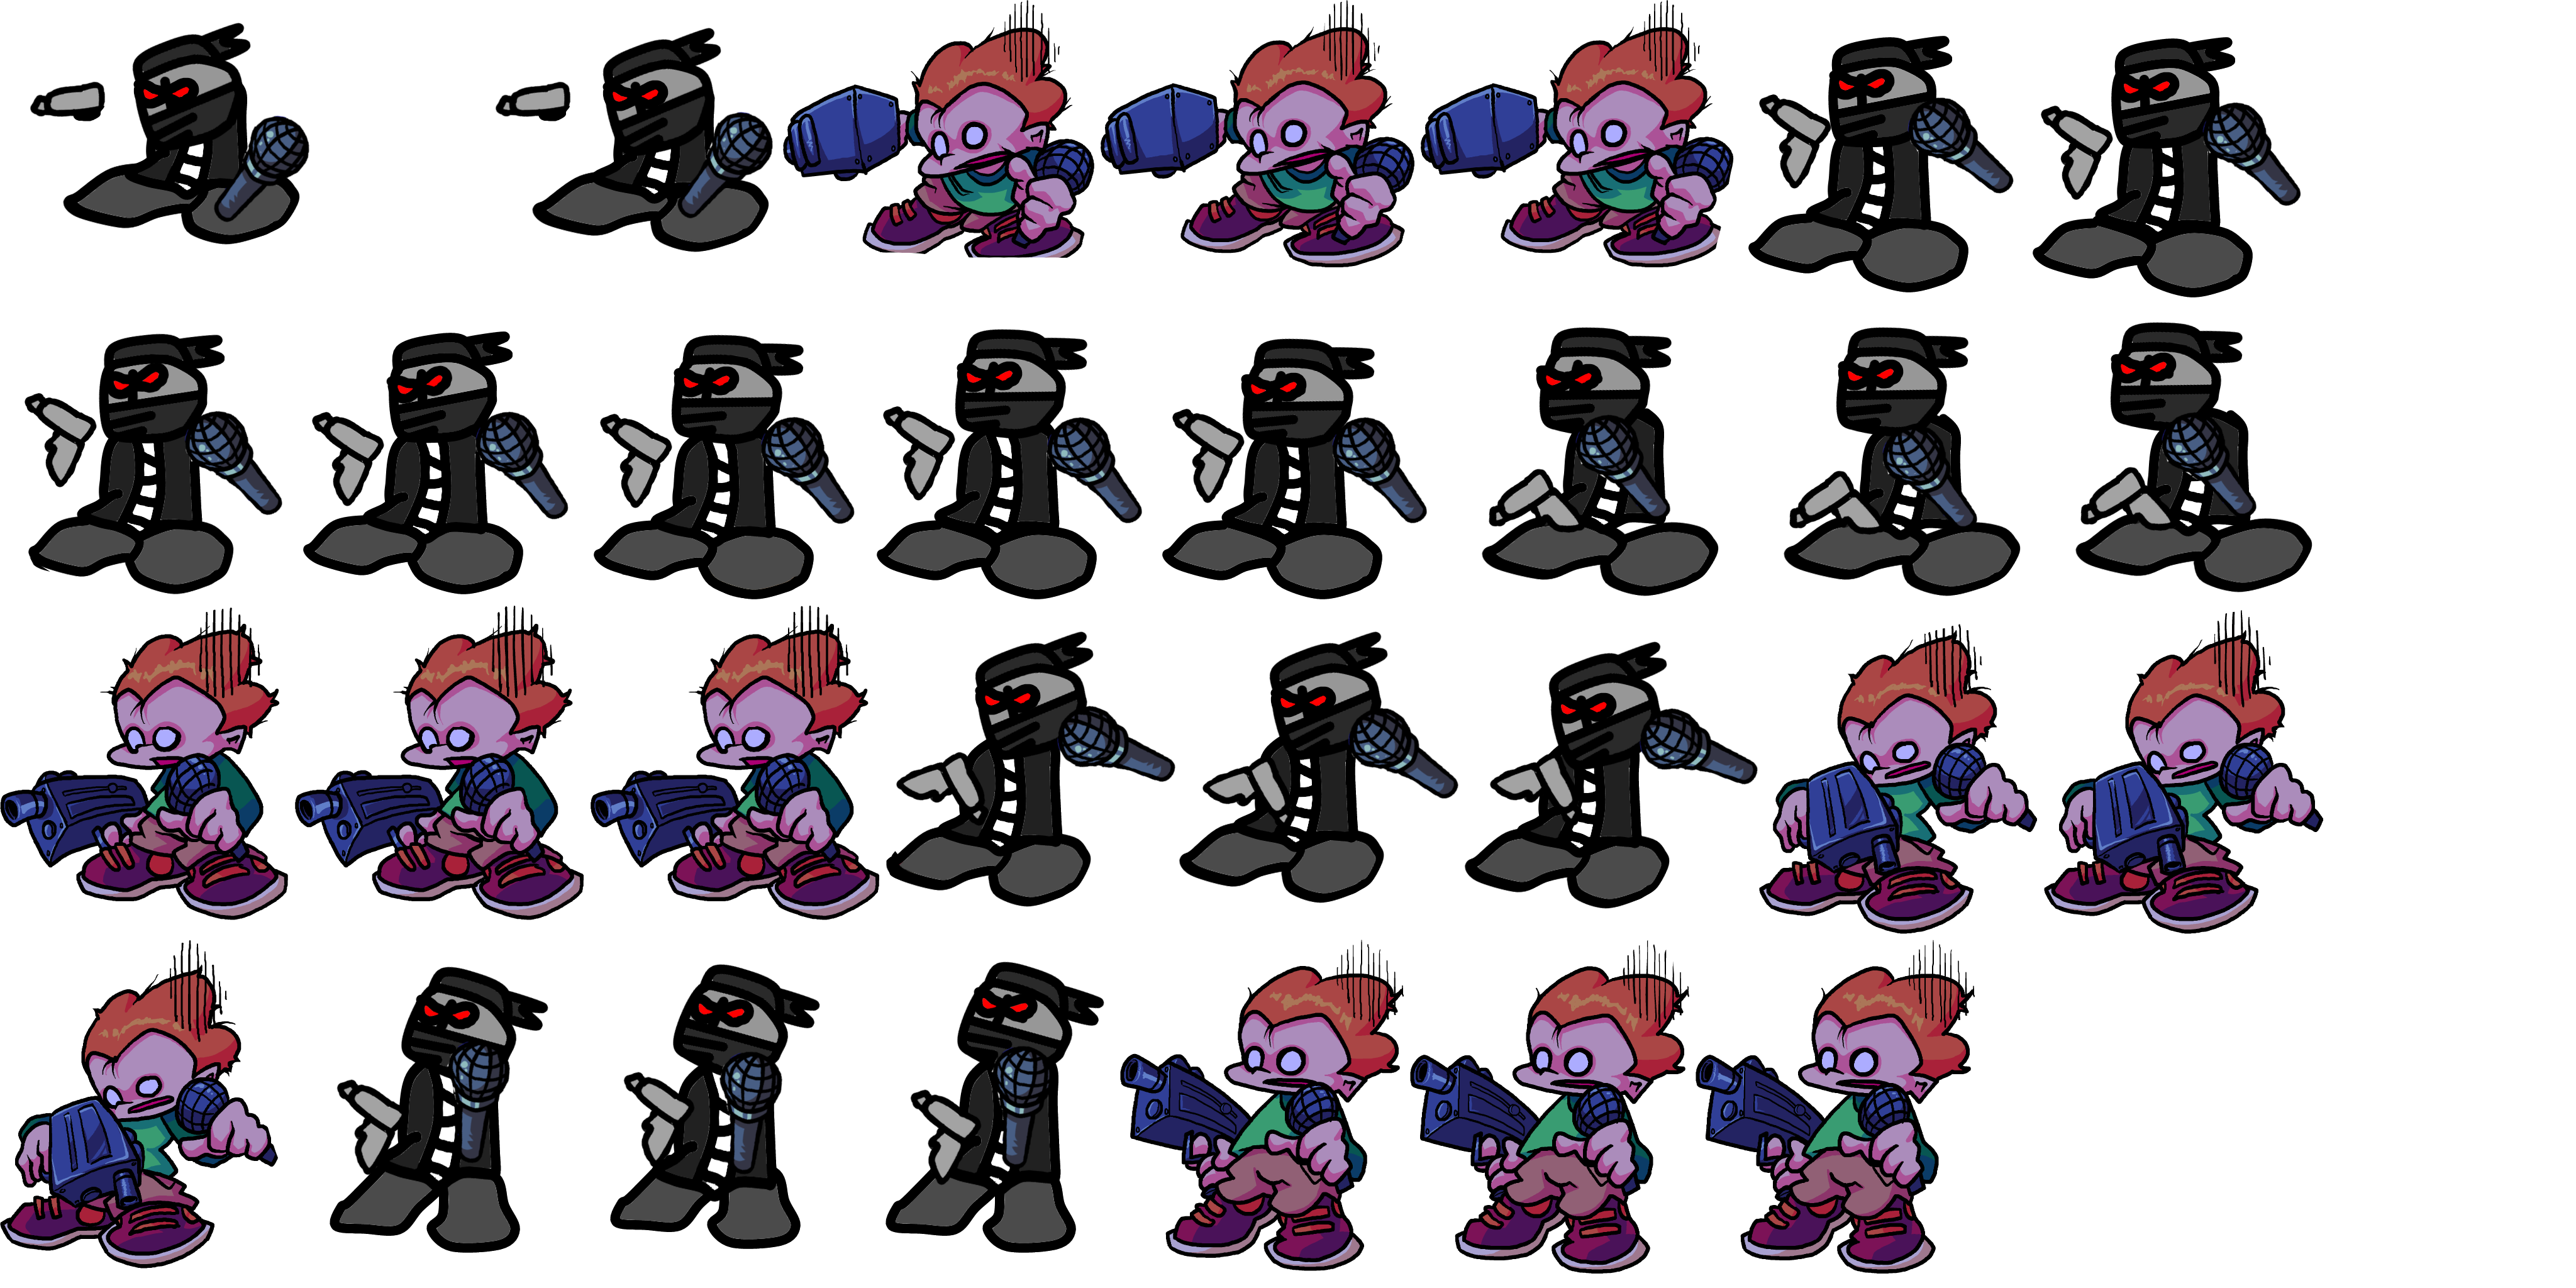 The Best 28 Whitty Sprite Sheet Friday Night Funkin S - vrogue.co